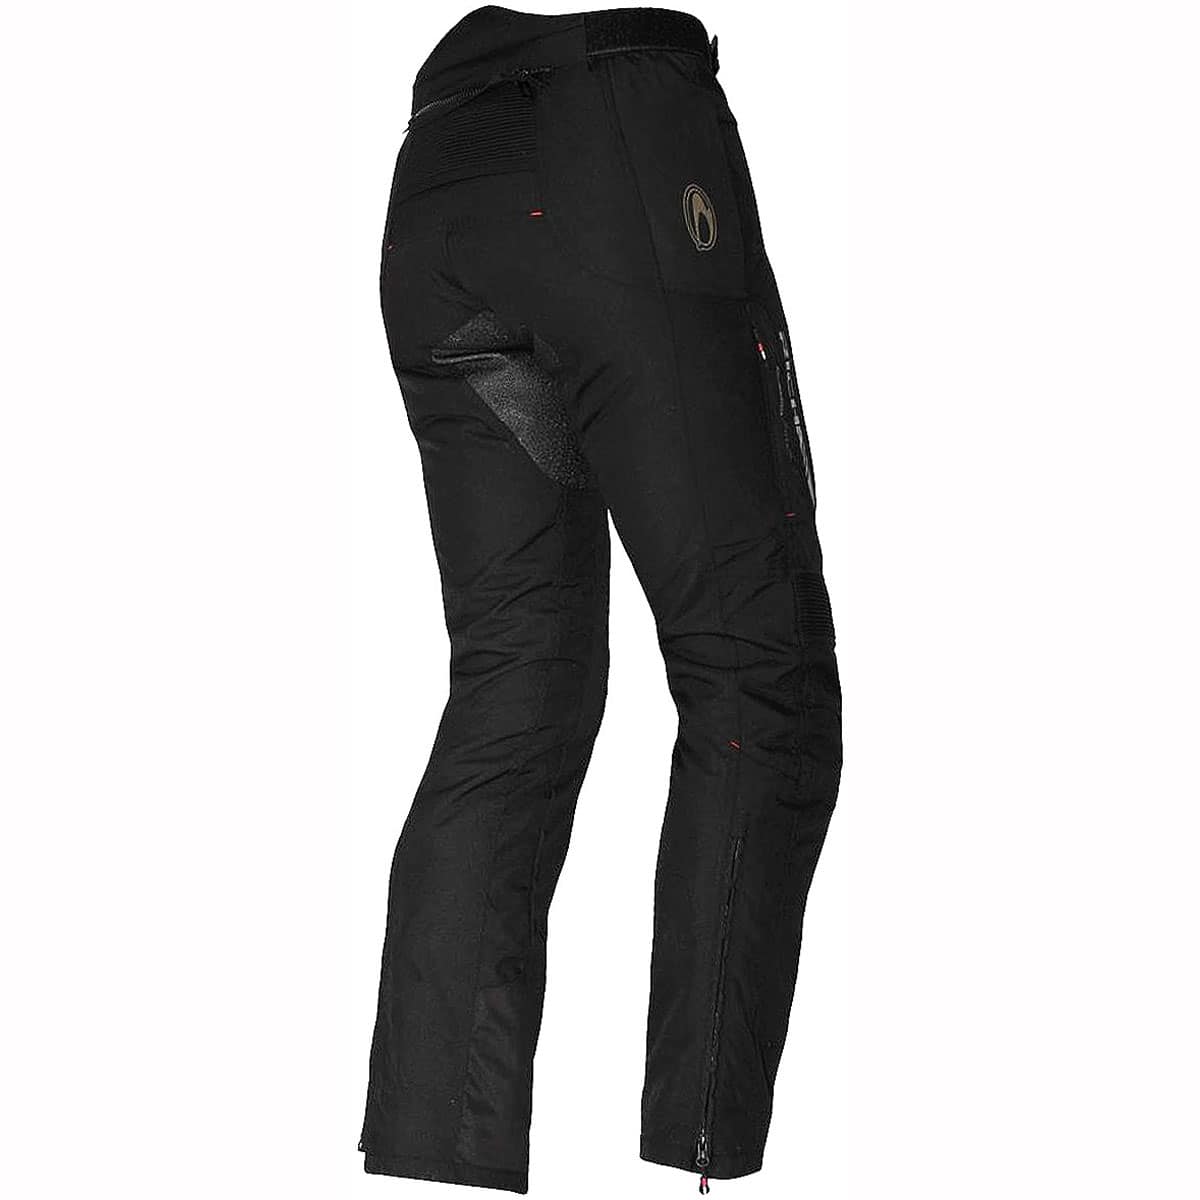 Waterproof ladies textile motorcycle trousers from Richa with D3O armour - rear